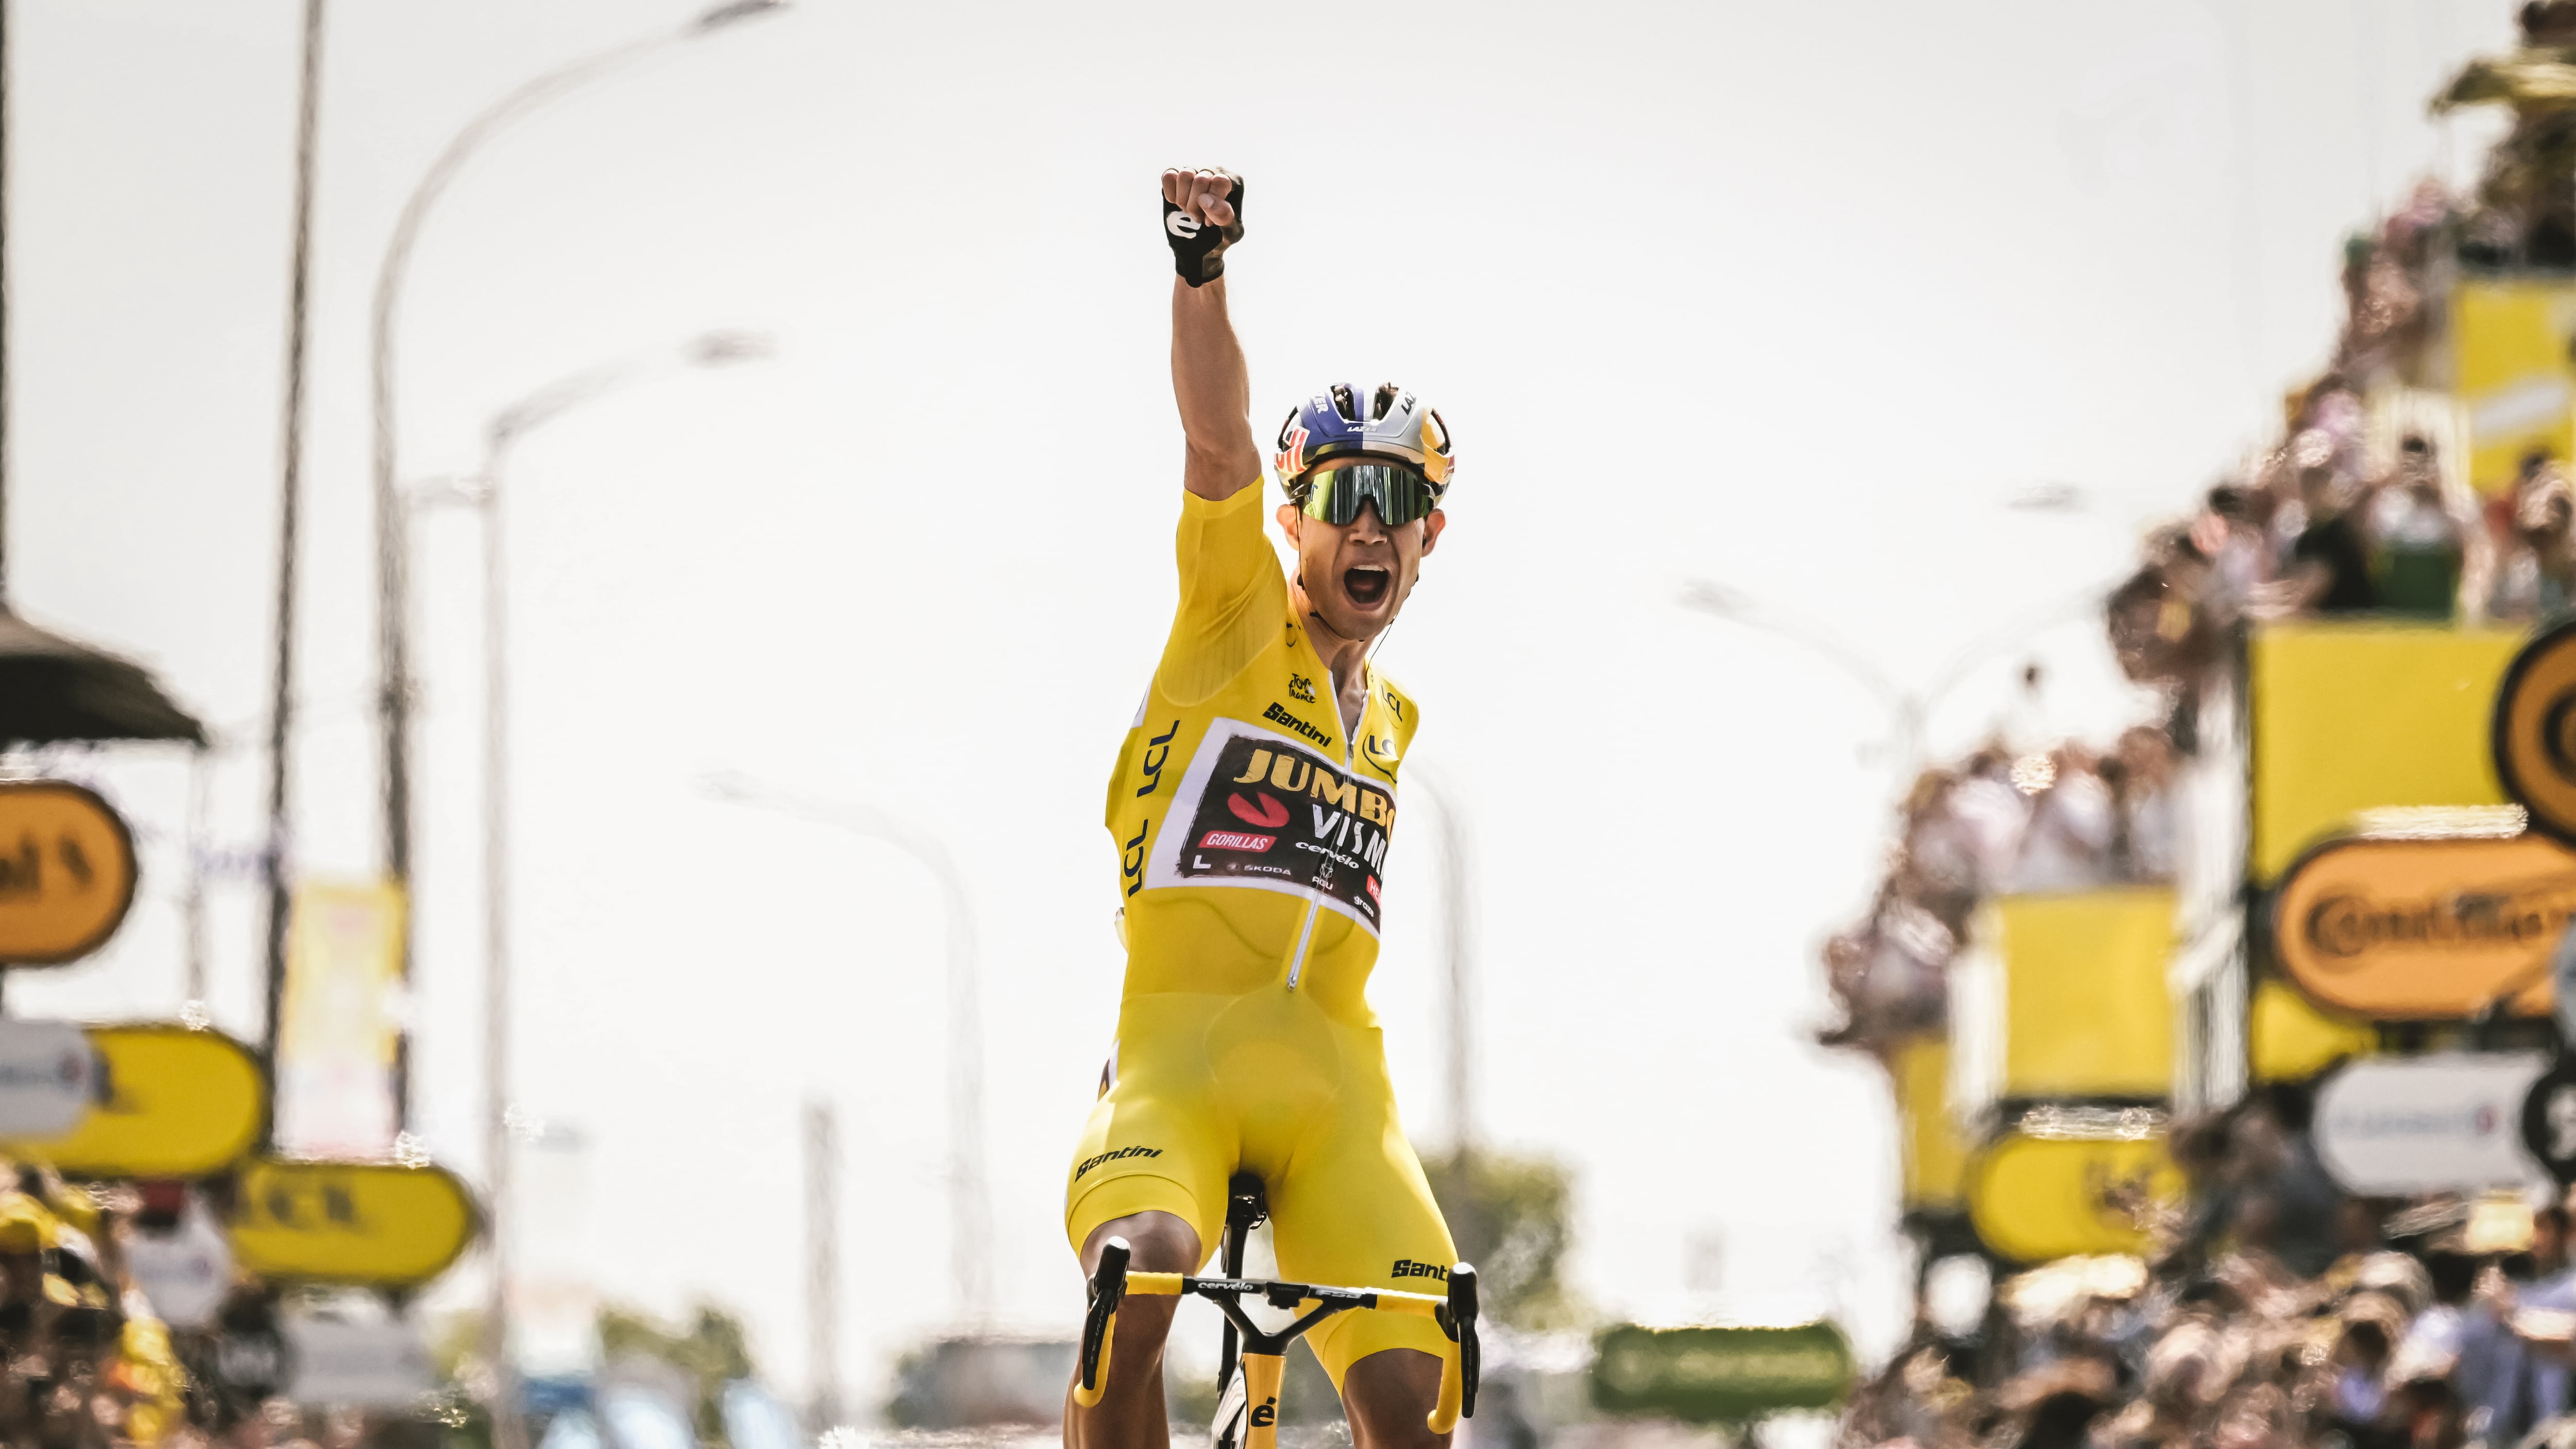 Wout Van Aert celebrates a stage win